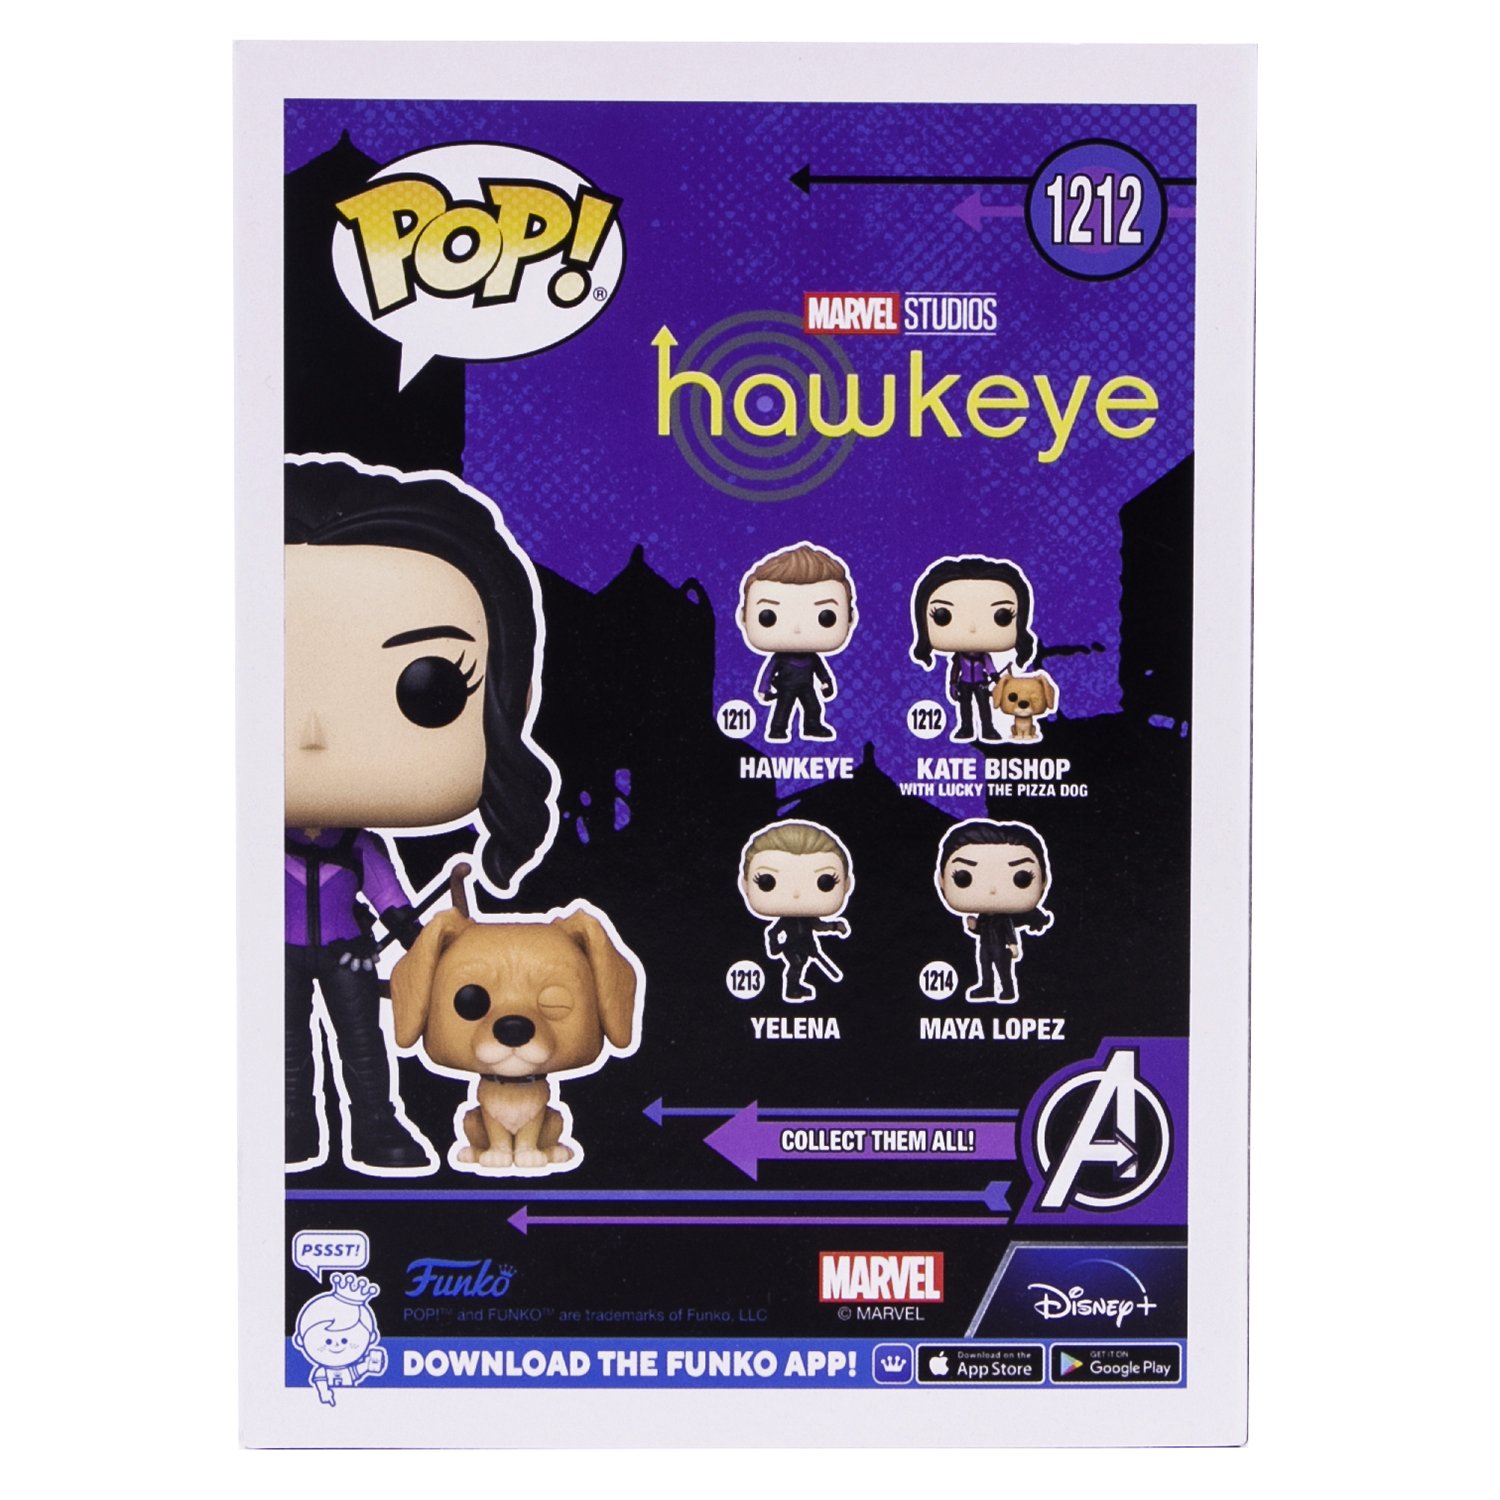 Игрушка Funko Pop Marvel Hawkeye Kate Bishop with Lucky the Pizza Dog 59481 Fun25492120